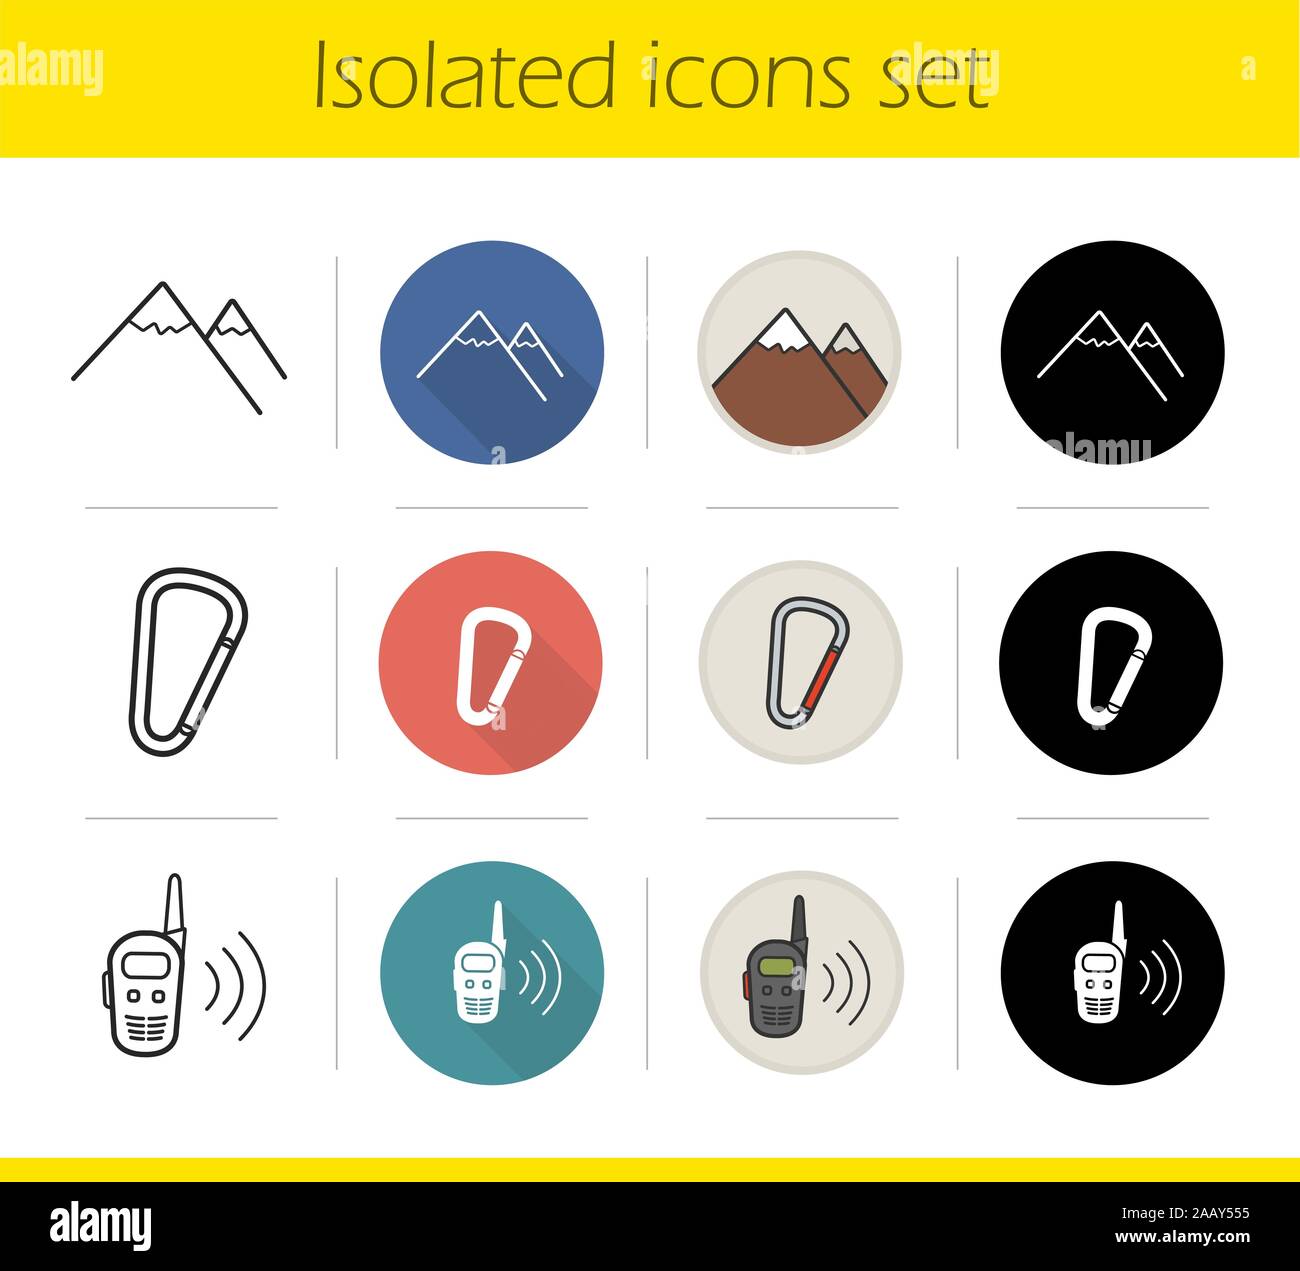 Hiking icons set. Flat design, linear, black and color styles. Mountaineering equipment. Mountain range, carabiner, spring hook, radio set. Climbing i Stock Vector